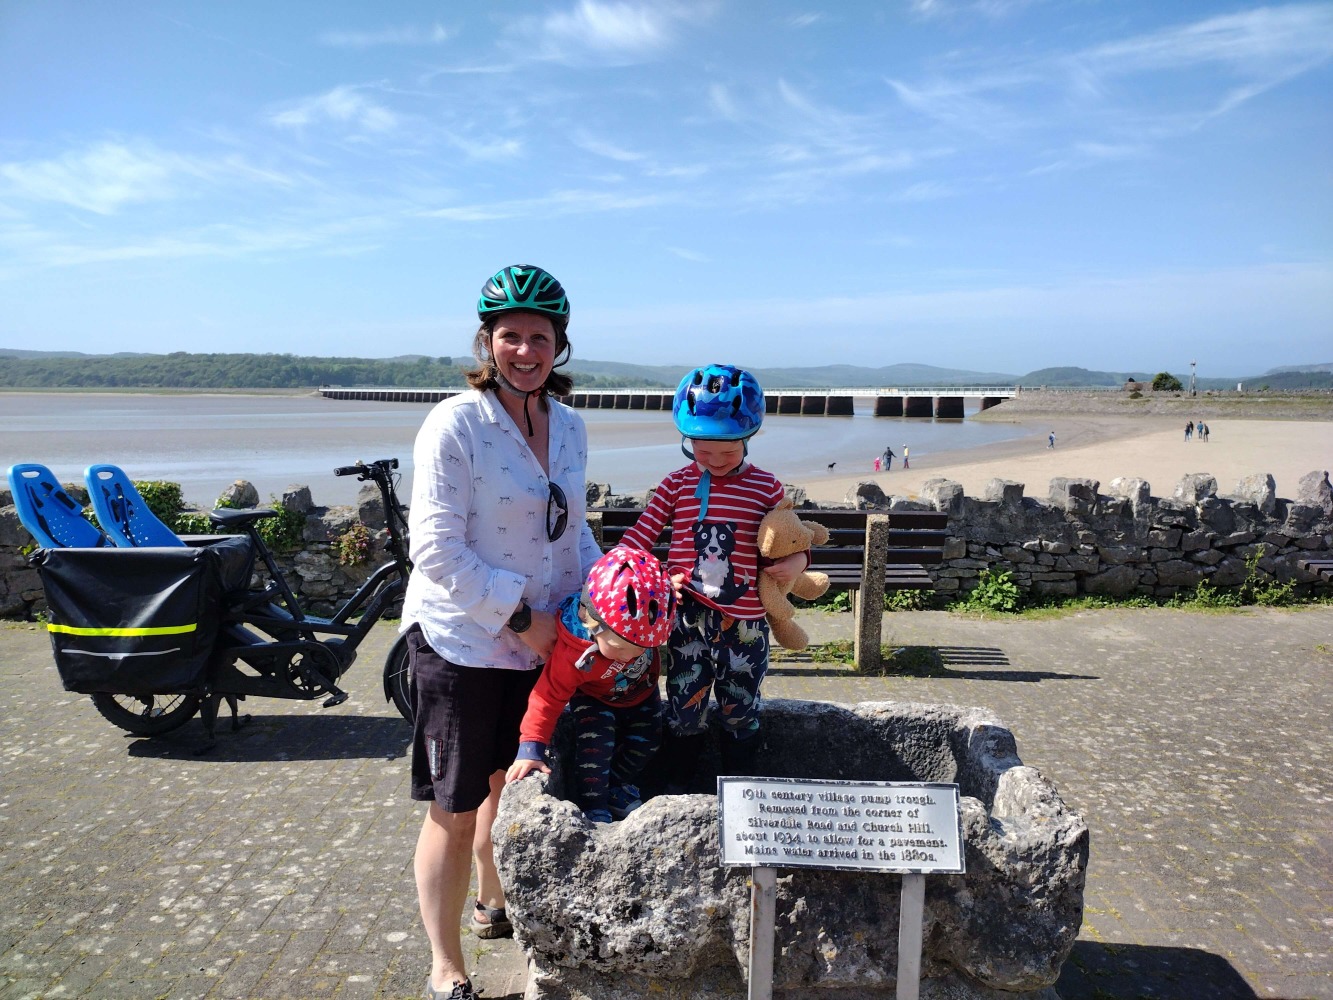 Cargo bikes and family cycle tours with children